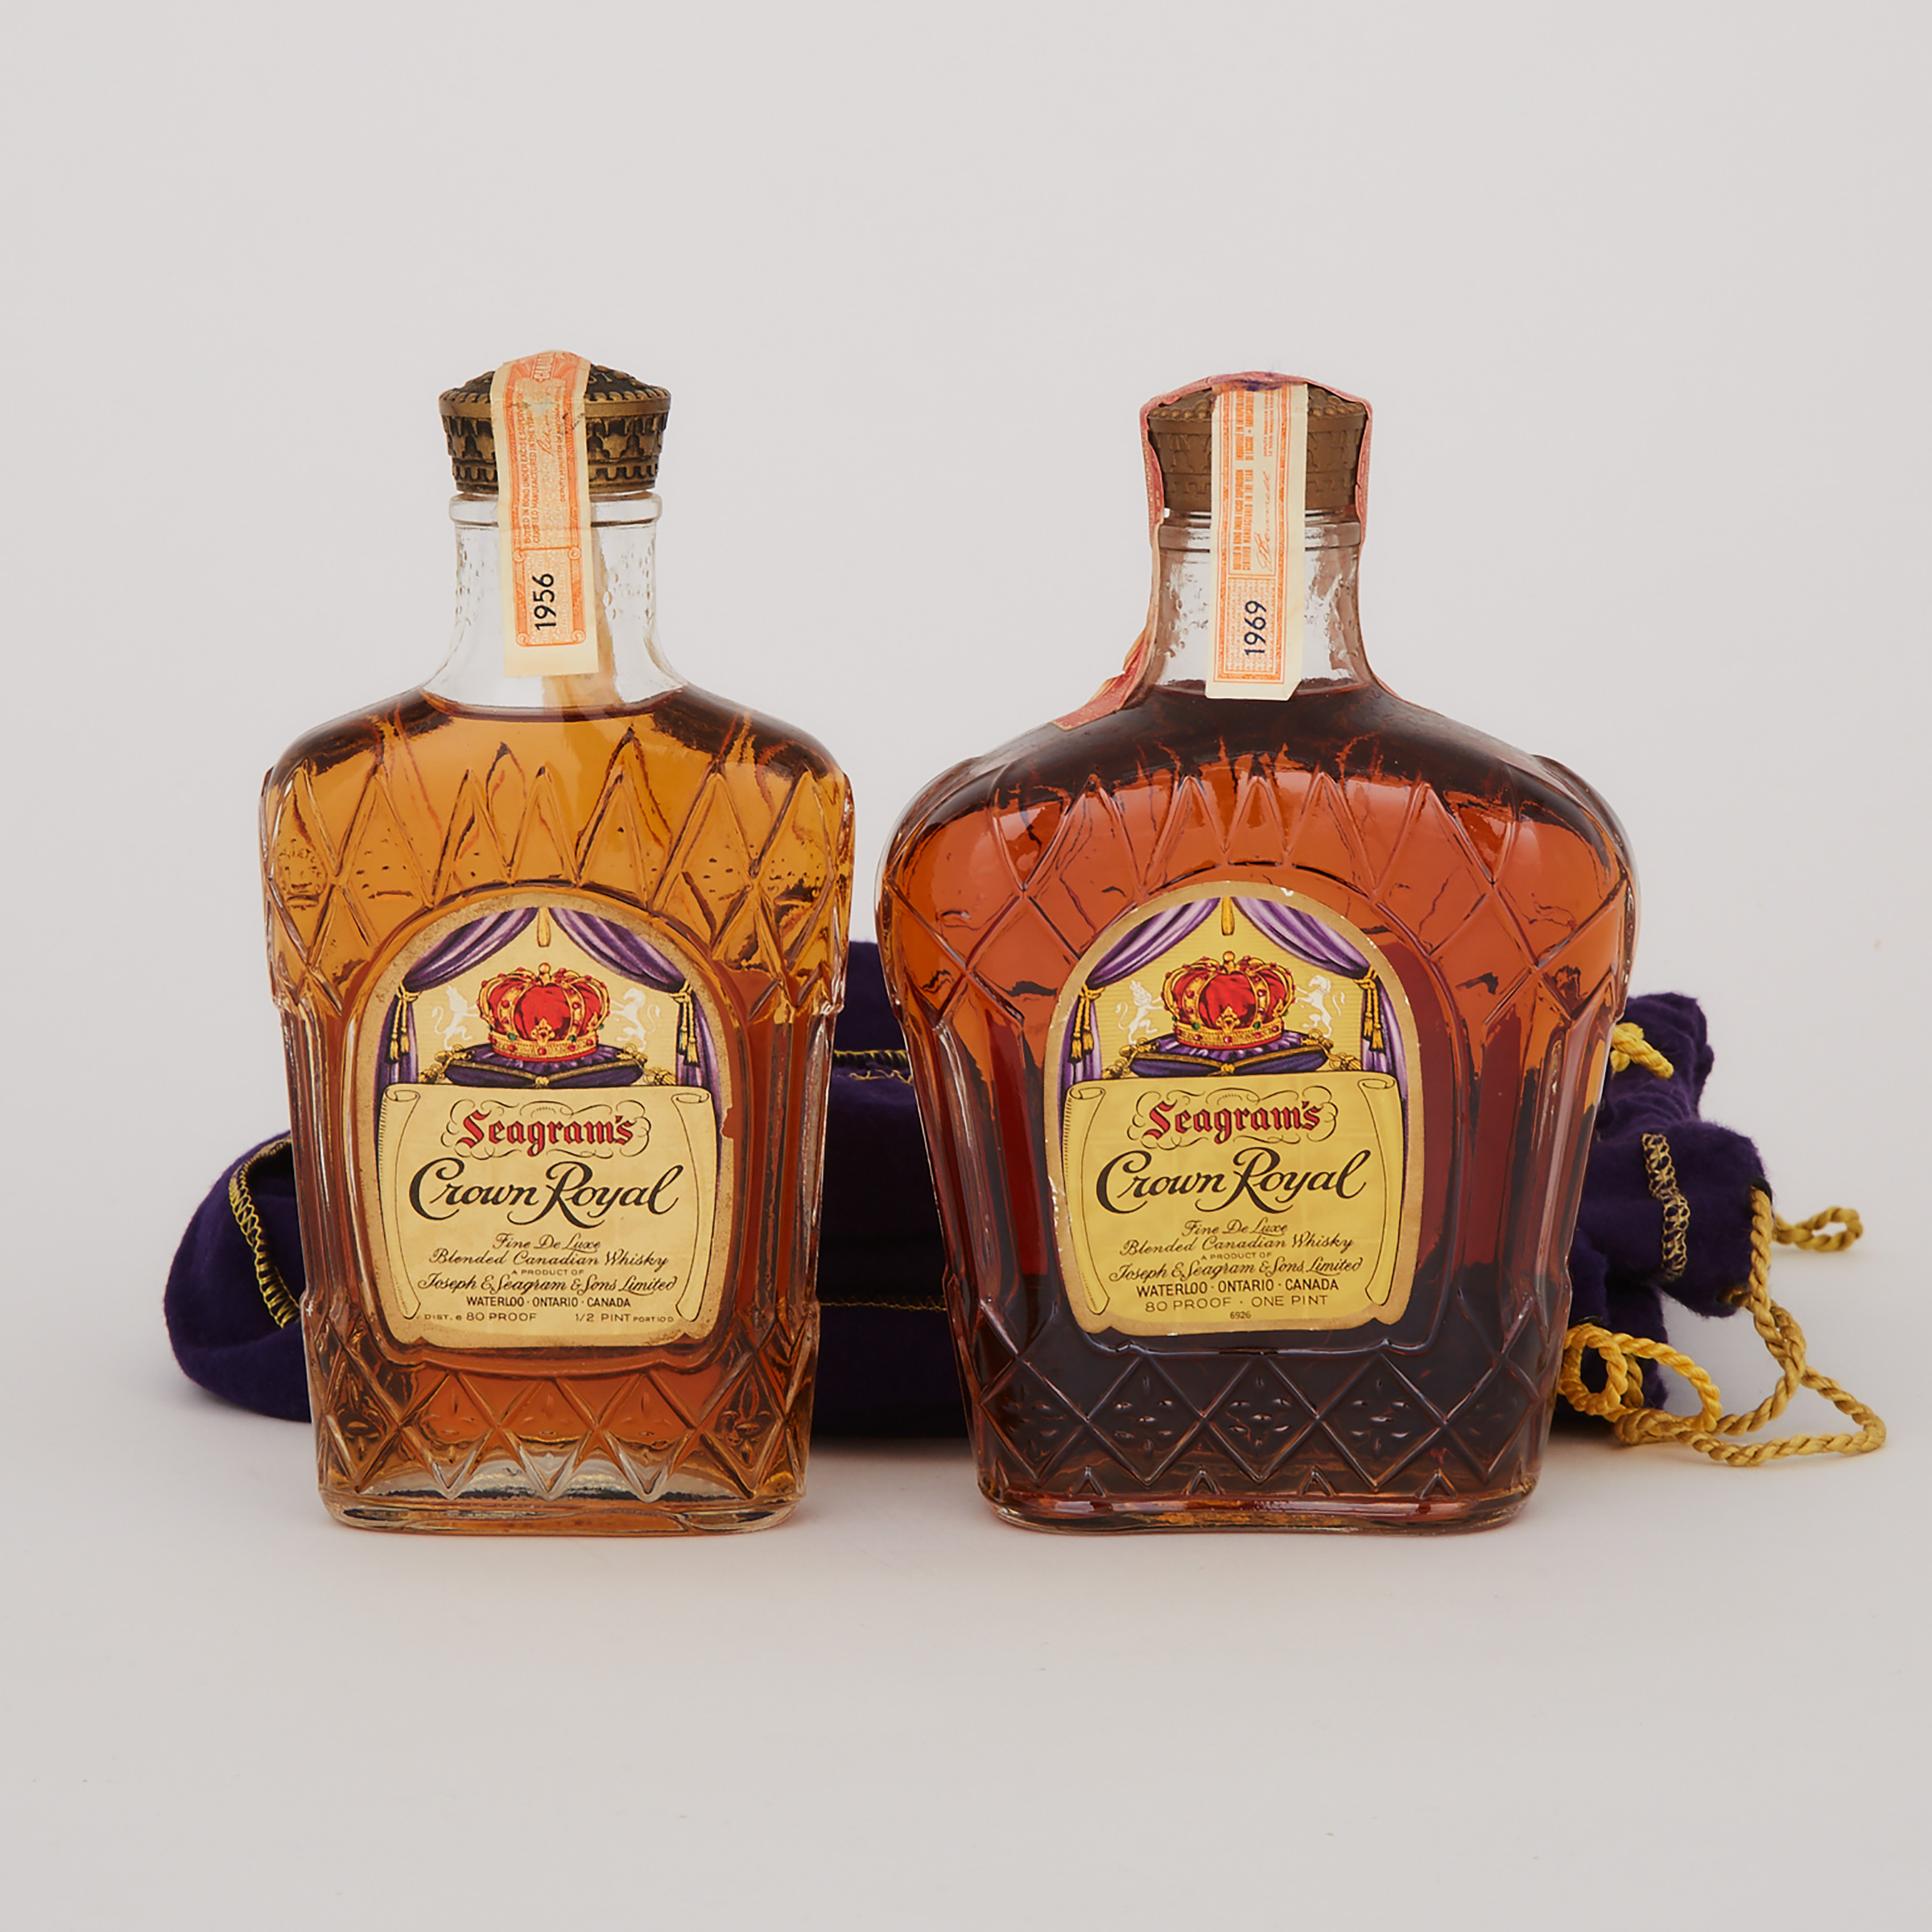 CROWN ROYAL DELUXE CANADIAN WHISKY (ONE 1/2 PINT)
CROWN ROYAL DELUXE CANADIAN WHISKY (ONE 1 PINT)